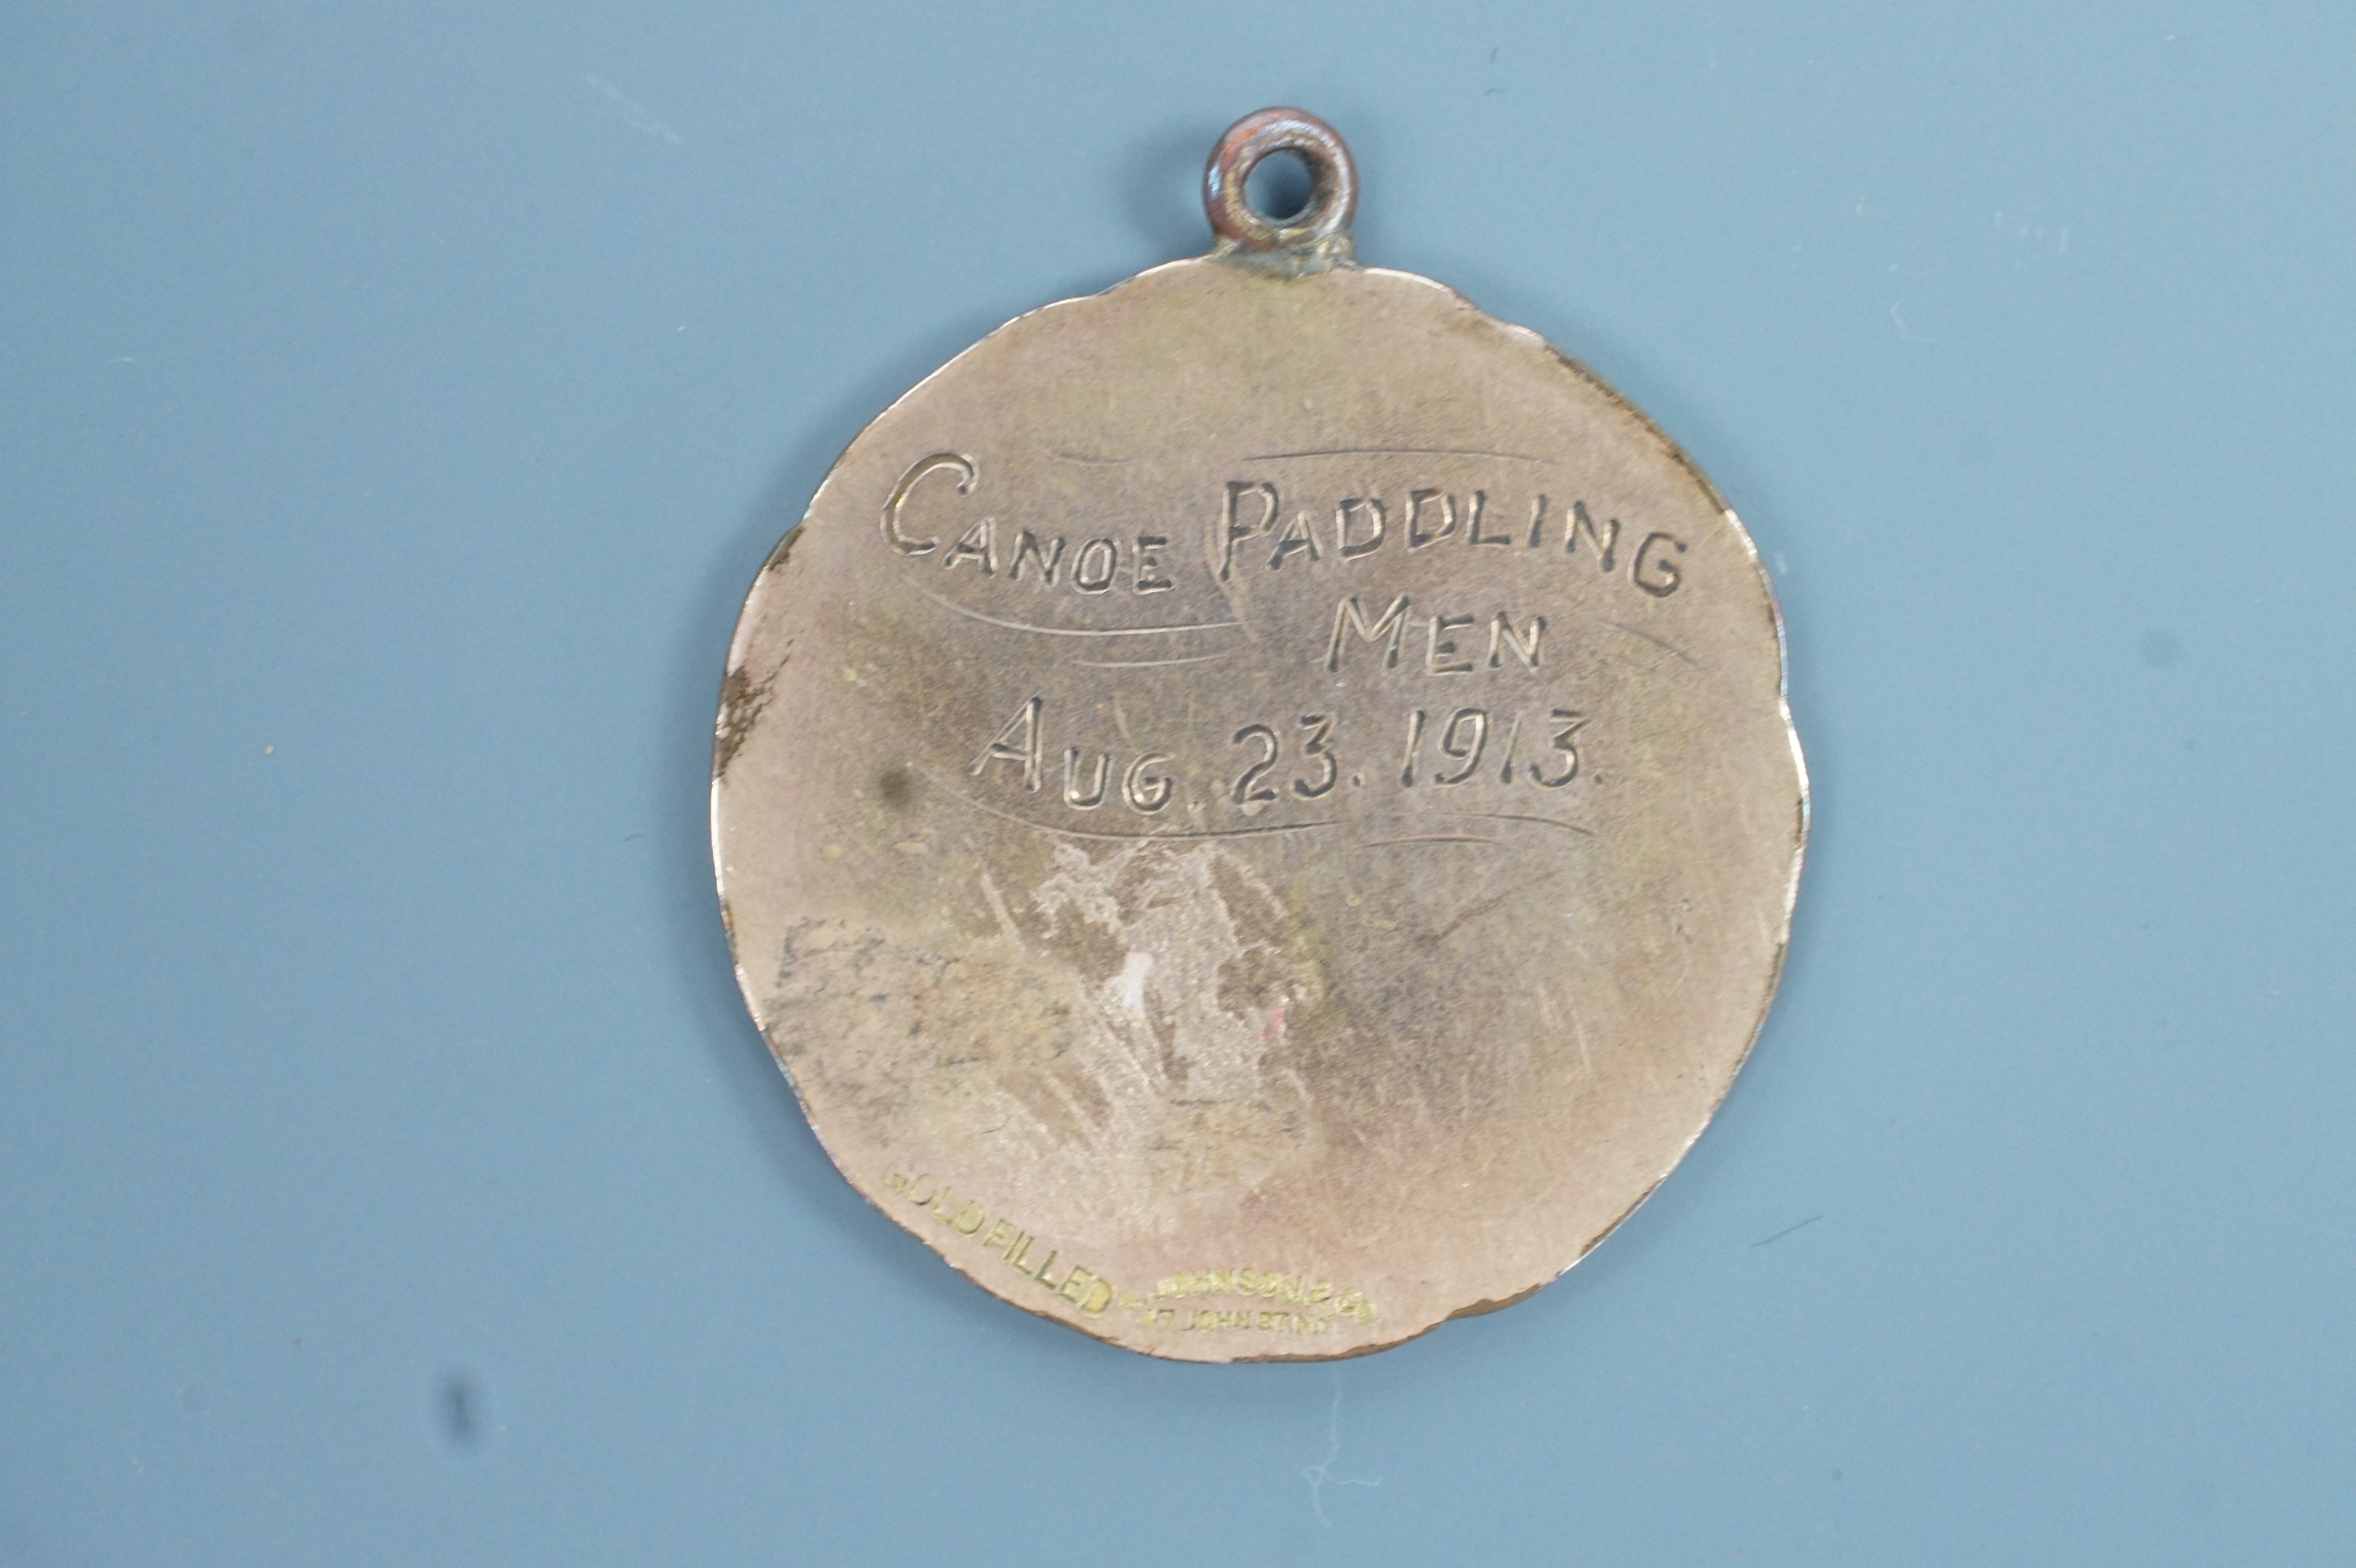 A 1913 US Shelter Island Yacht Club enamelled prize fob medallion, 33 mm - Image 2 of 2